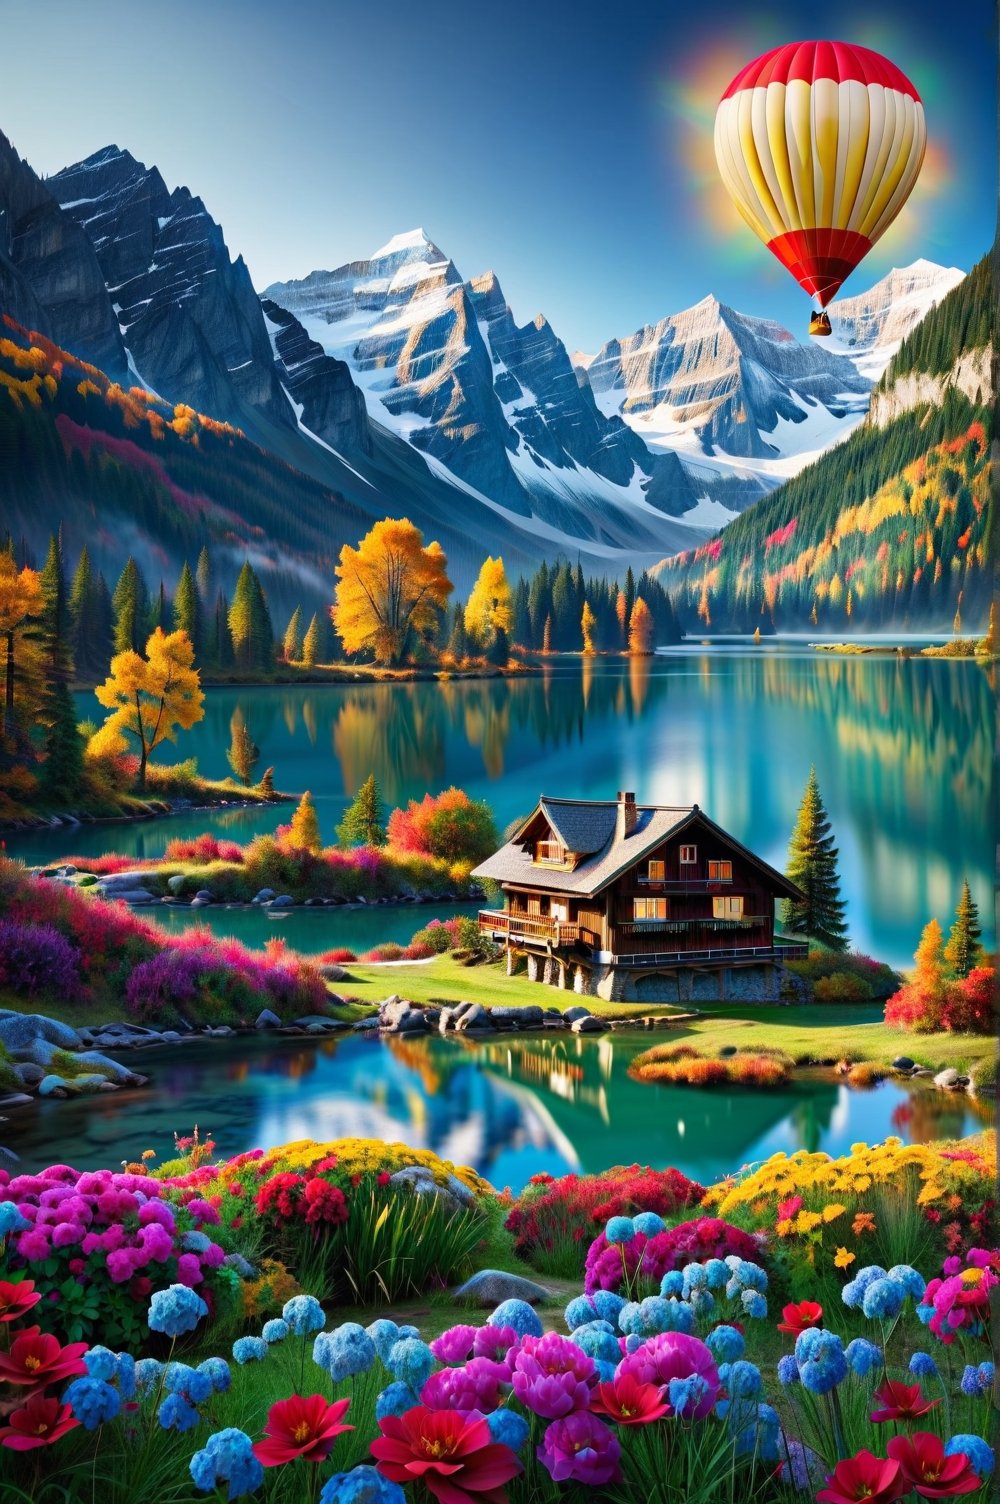 As [autumn] approaches, the mind is transported to a stunning setting, a chalet at the foot of the mountain, on the edge of a crystal clear lake that reflects a beautiful giant balloon colored with many seasonal flowers, which looks like something out of a fairy tale. This landscape is so magnificent that it transcends words. Textured details in high quality and resolution bring exceptional precision and realism to portray the joy of the season. With meticulous color adjustments and perfect lighting, images capture the mood with low noise and sharp edges, creating harmonious compositions that are truly award-winning works.